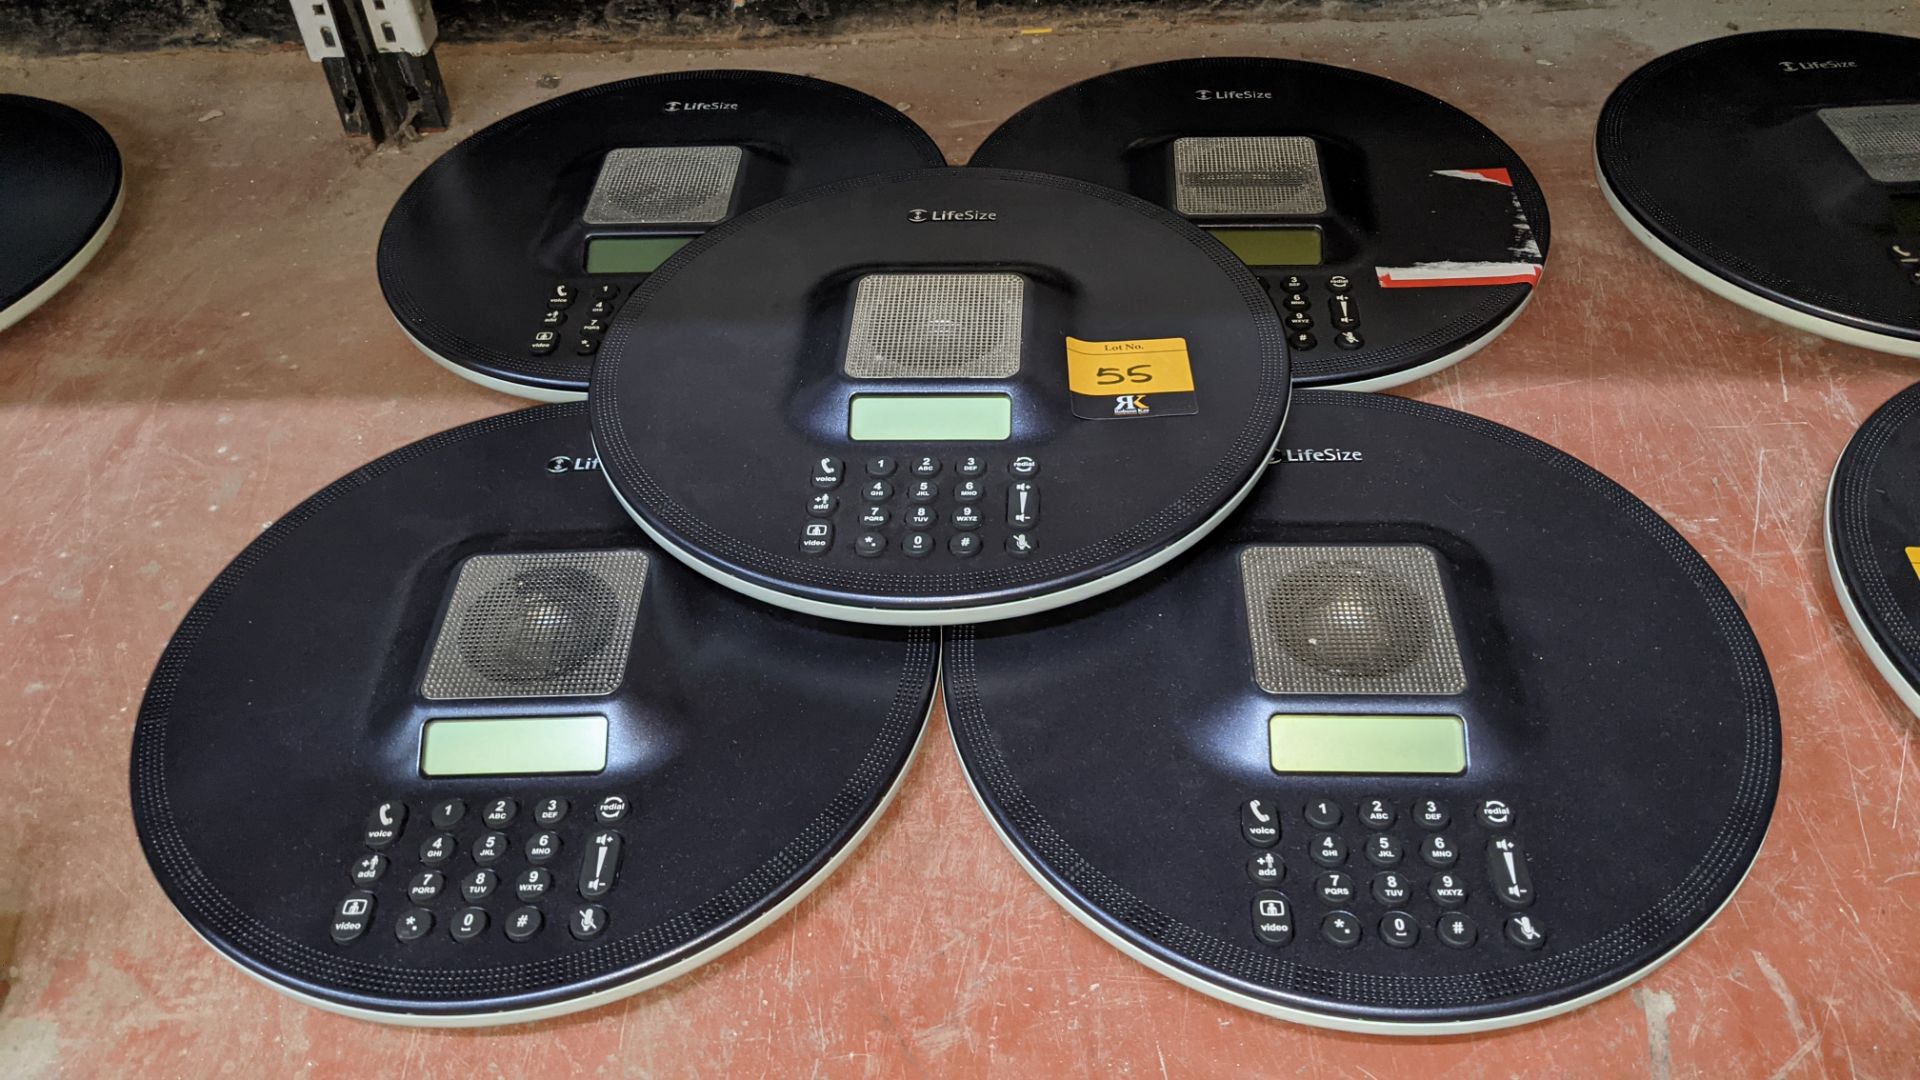 5 off LifeSize phones. NB lots 46 - 47, 53 - 57 & 88 all consist of LifeSize equipment